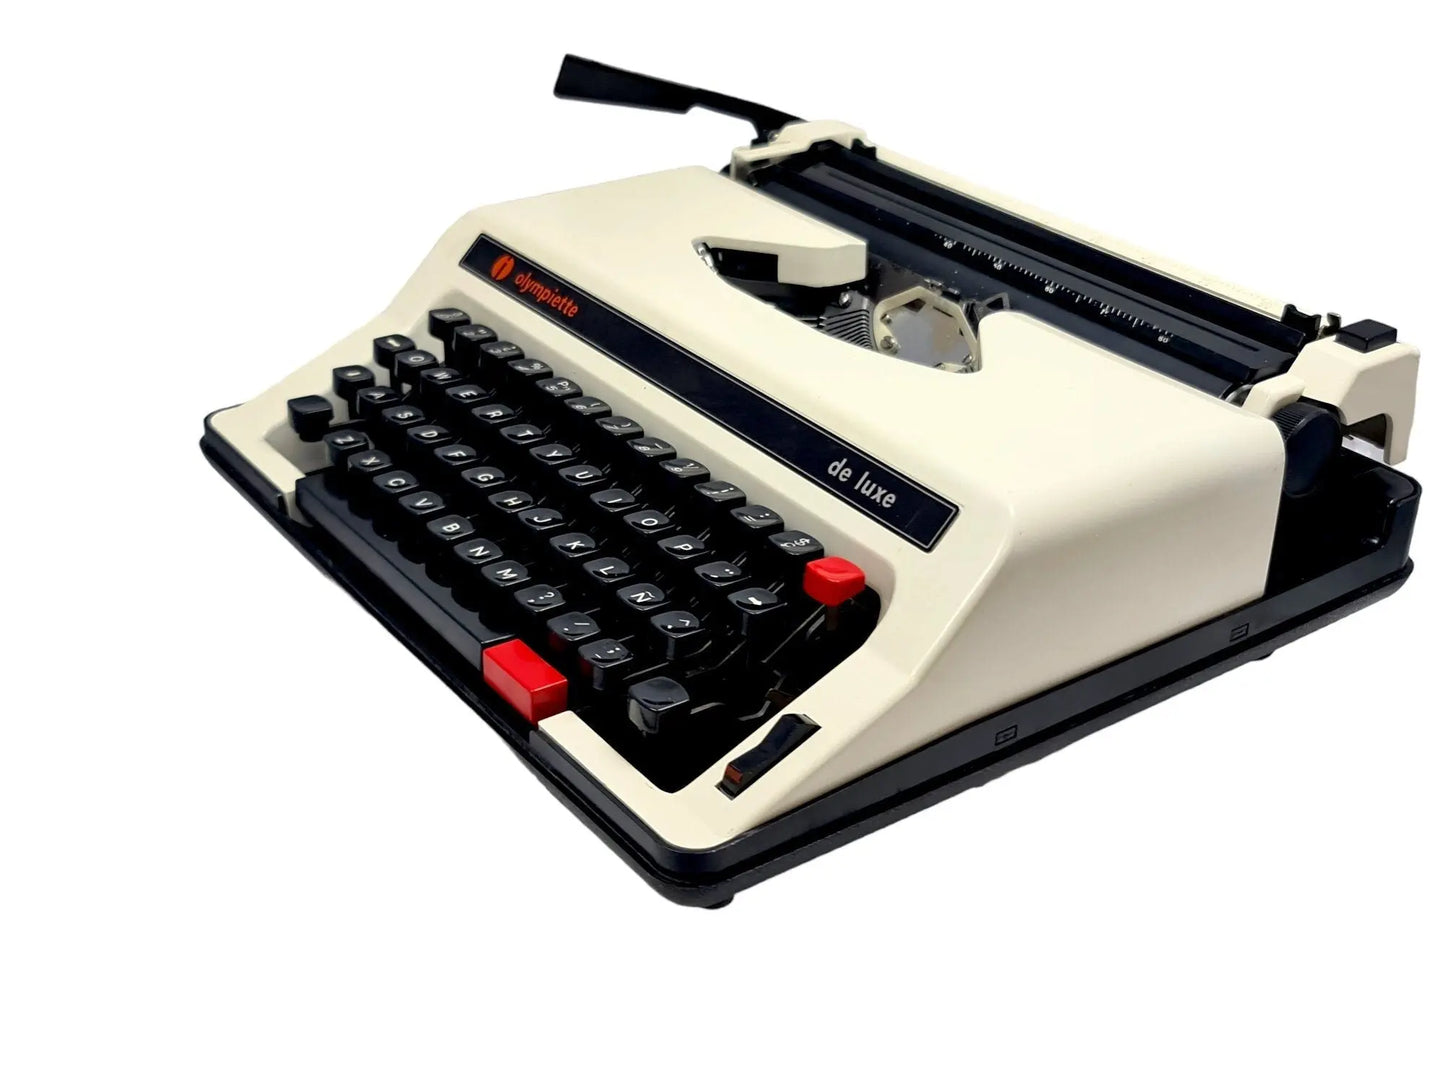 Olympiette Deluxe White, Manual Vintage Portable Typewriter, Professionally Serviced by Typewriter.Company - ElGranero Typewriter.Company